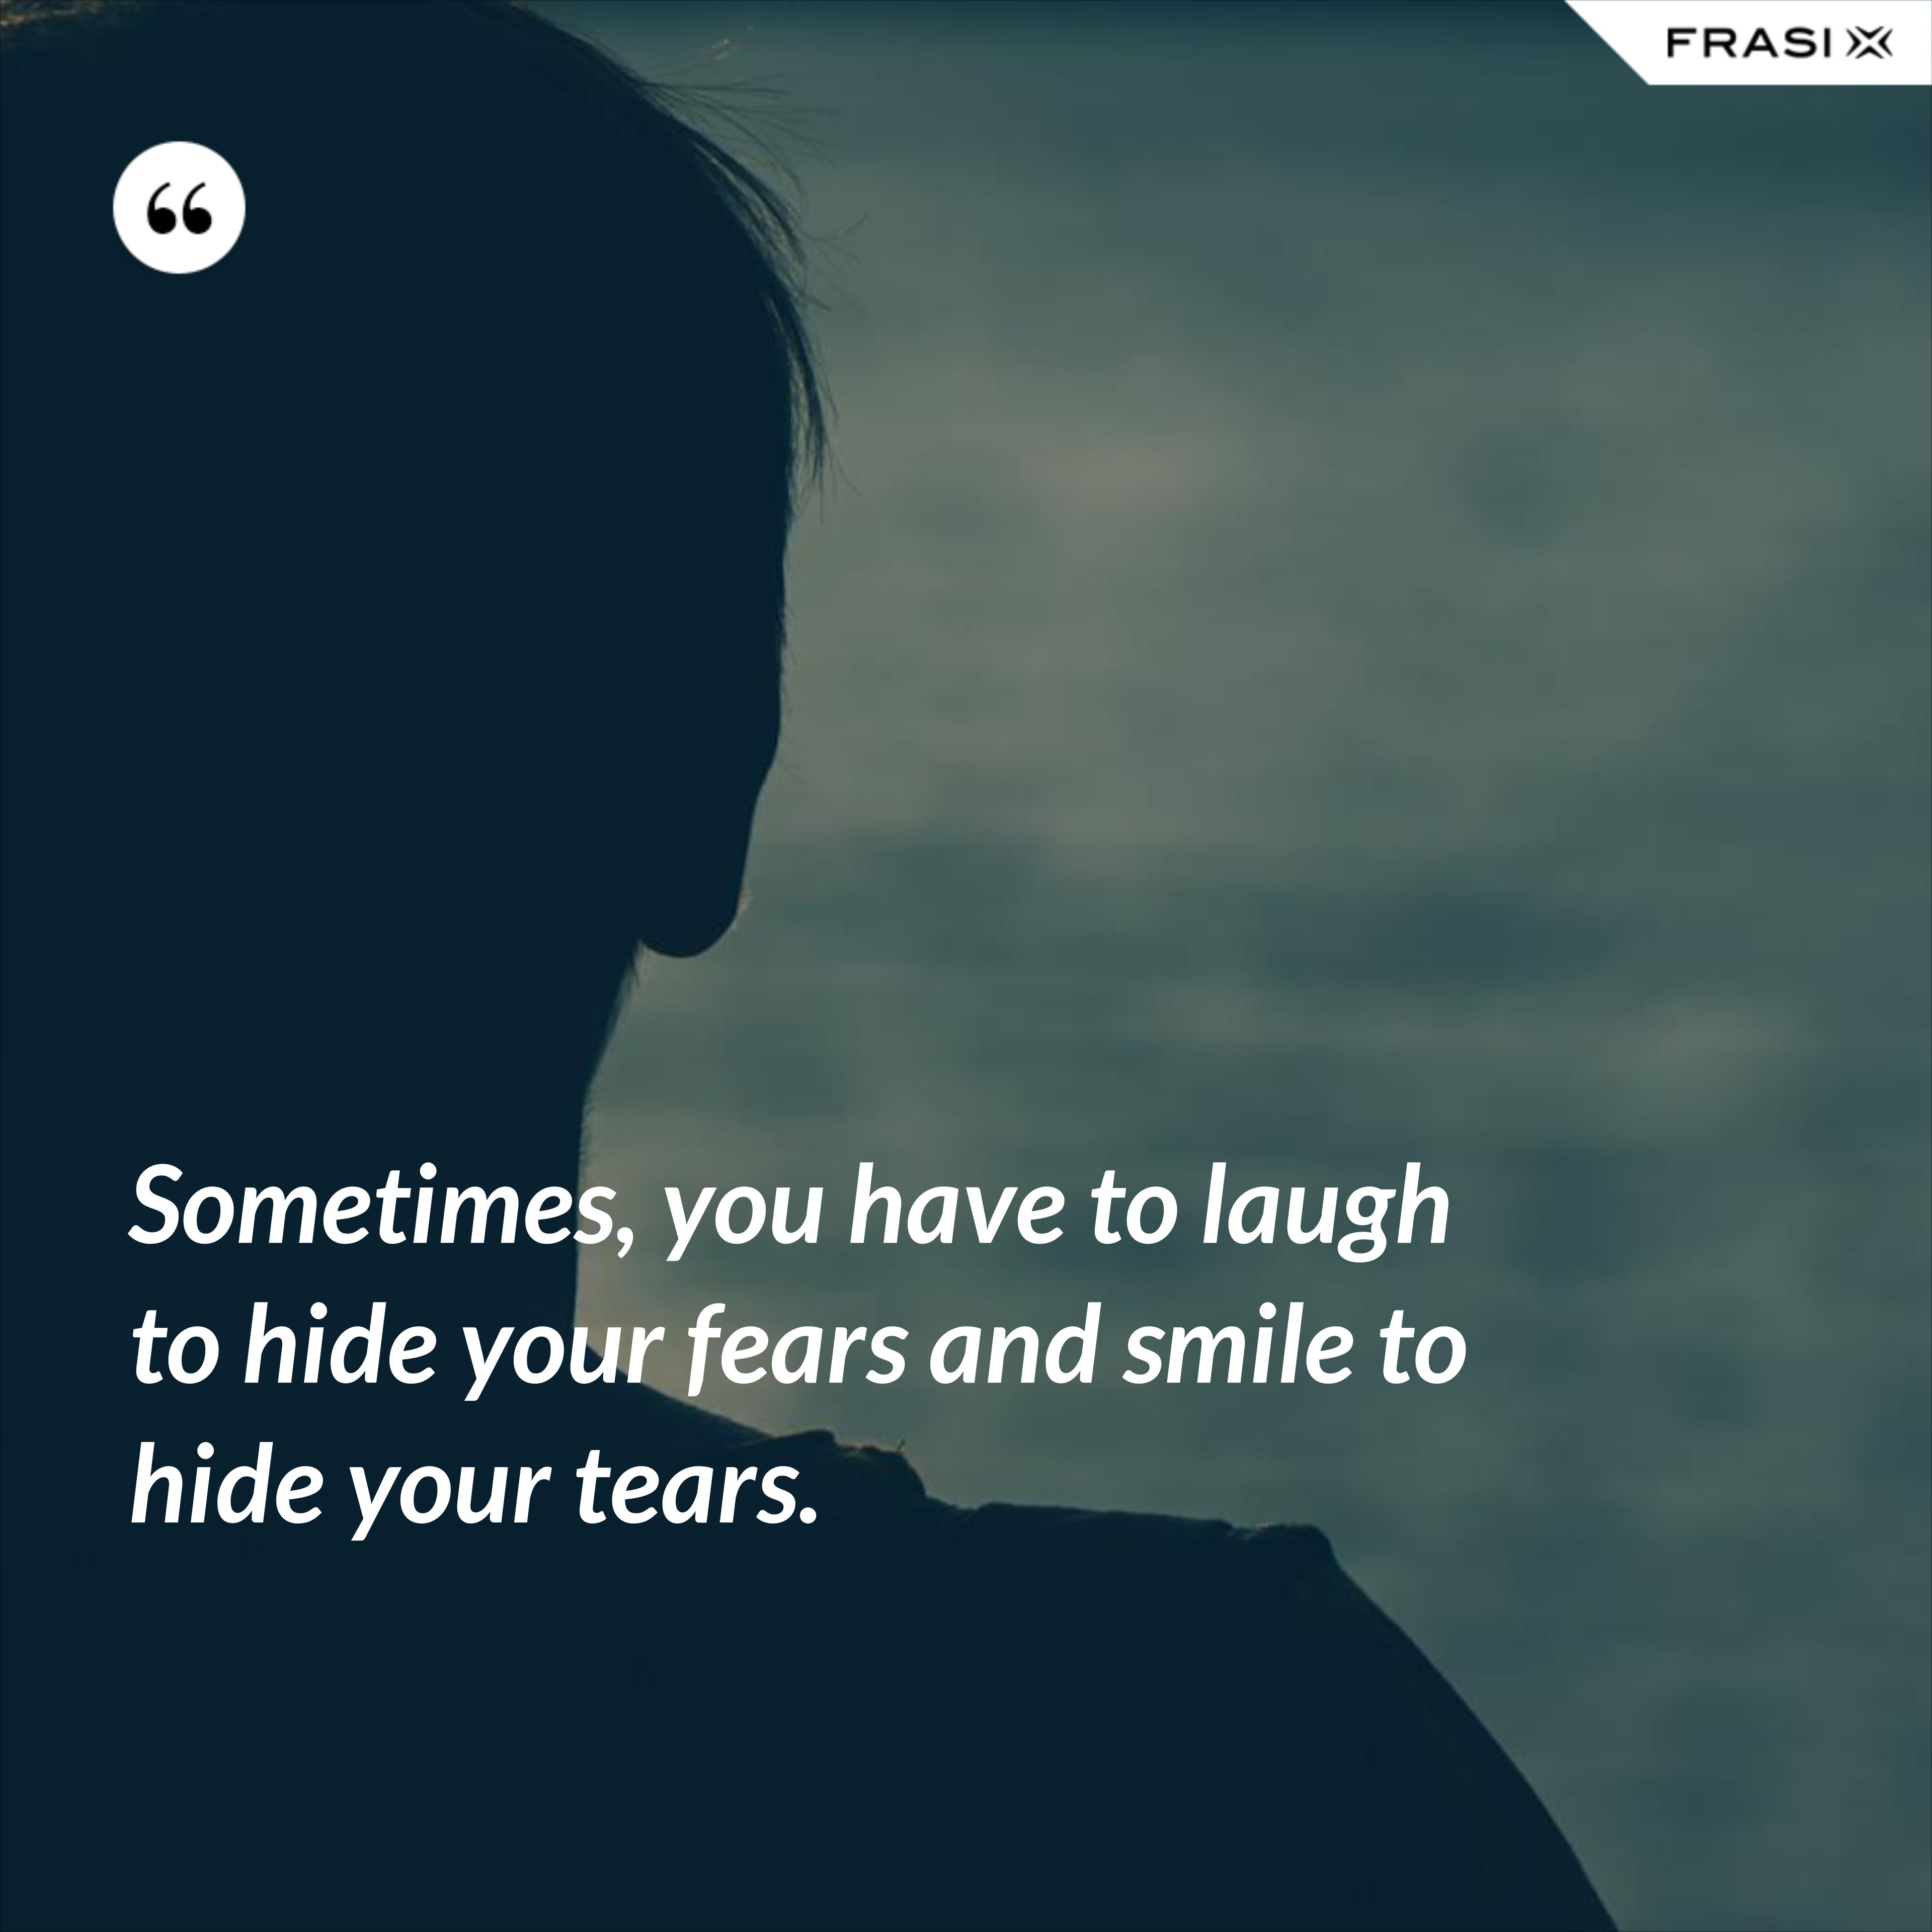 Sometimes, you have to laugh to hide your fears and smile to hide your tears. - Anonimo